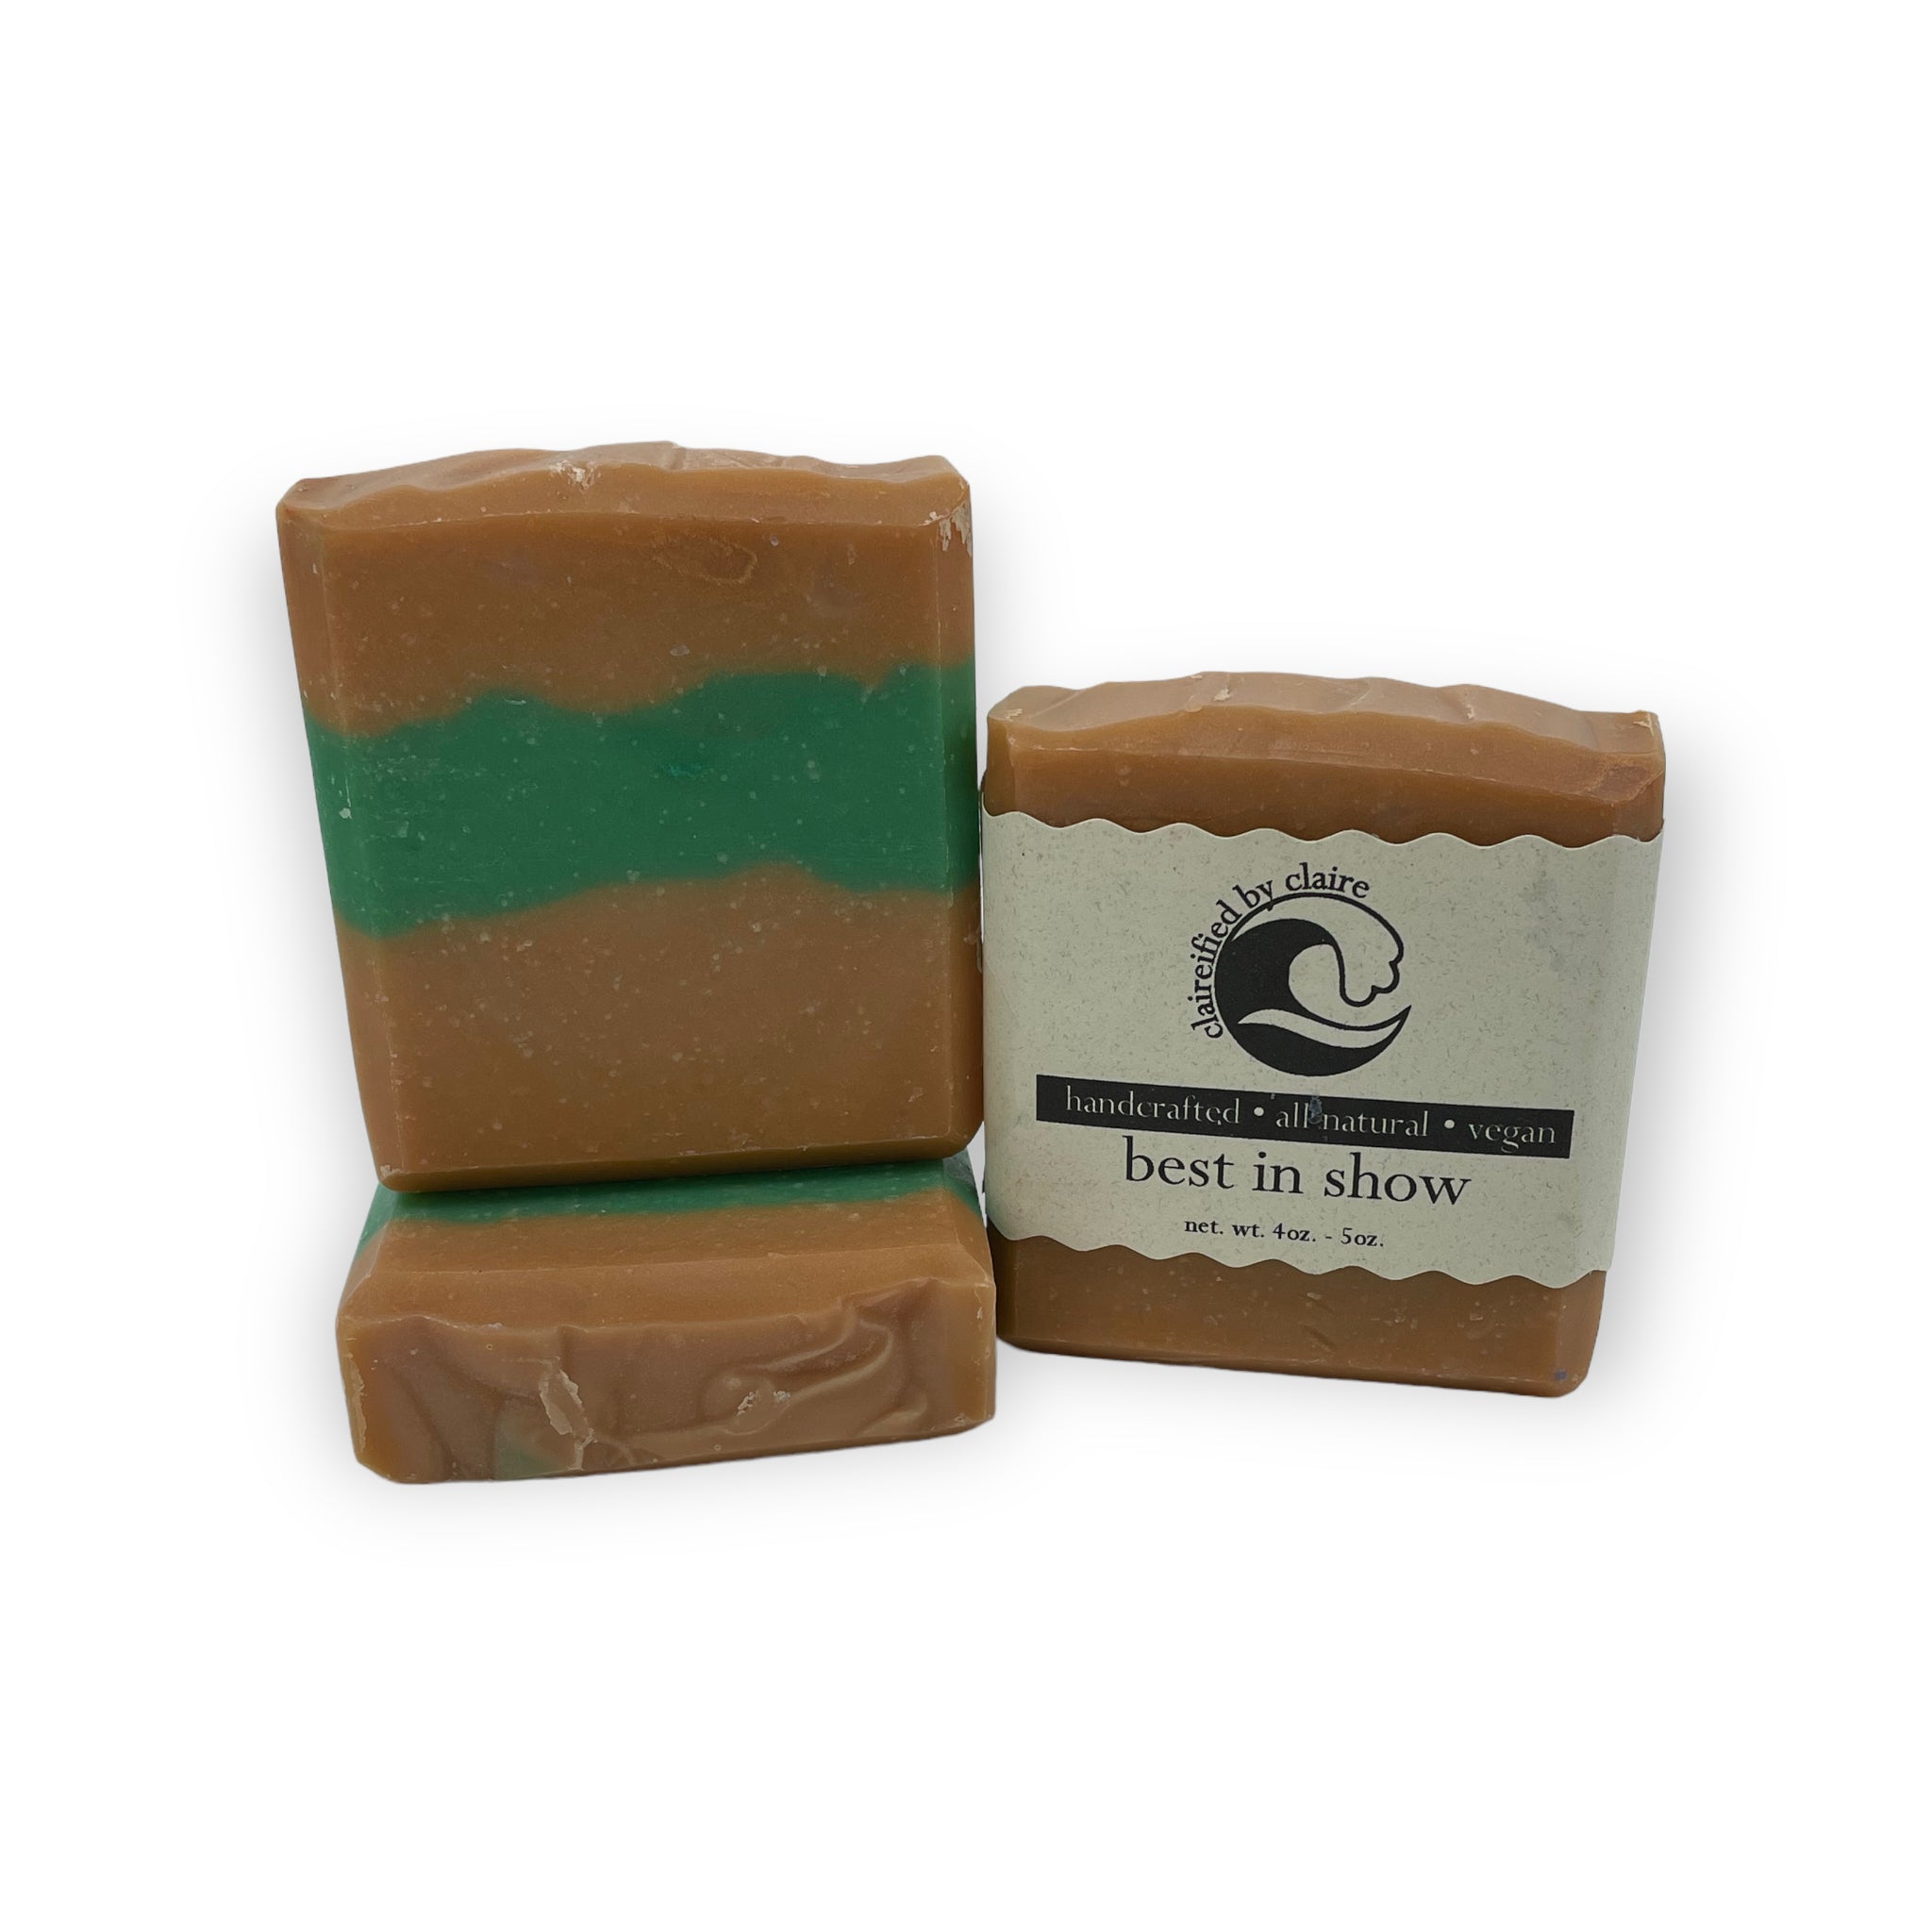 Best in Show handmade all-natural soap inspired by Pluto from Disney's fab 5 - 0